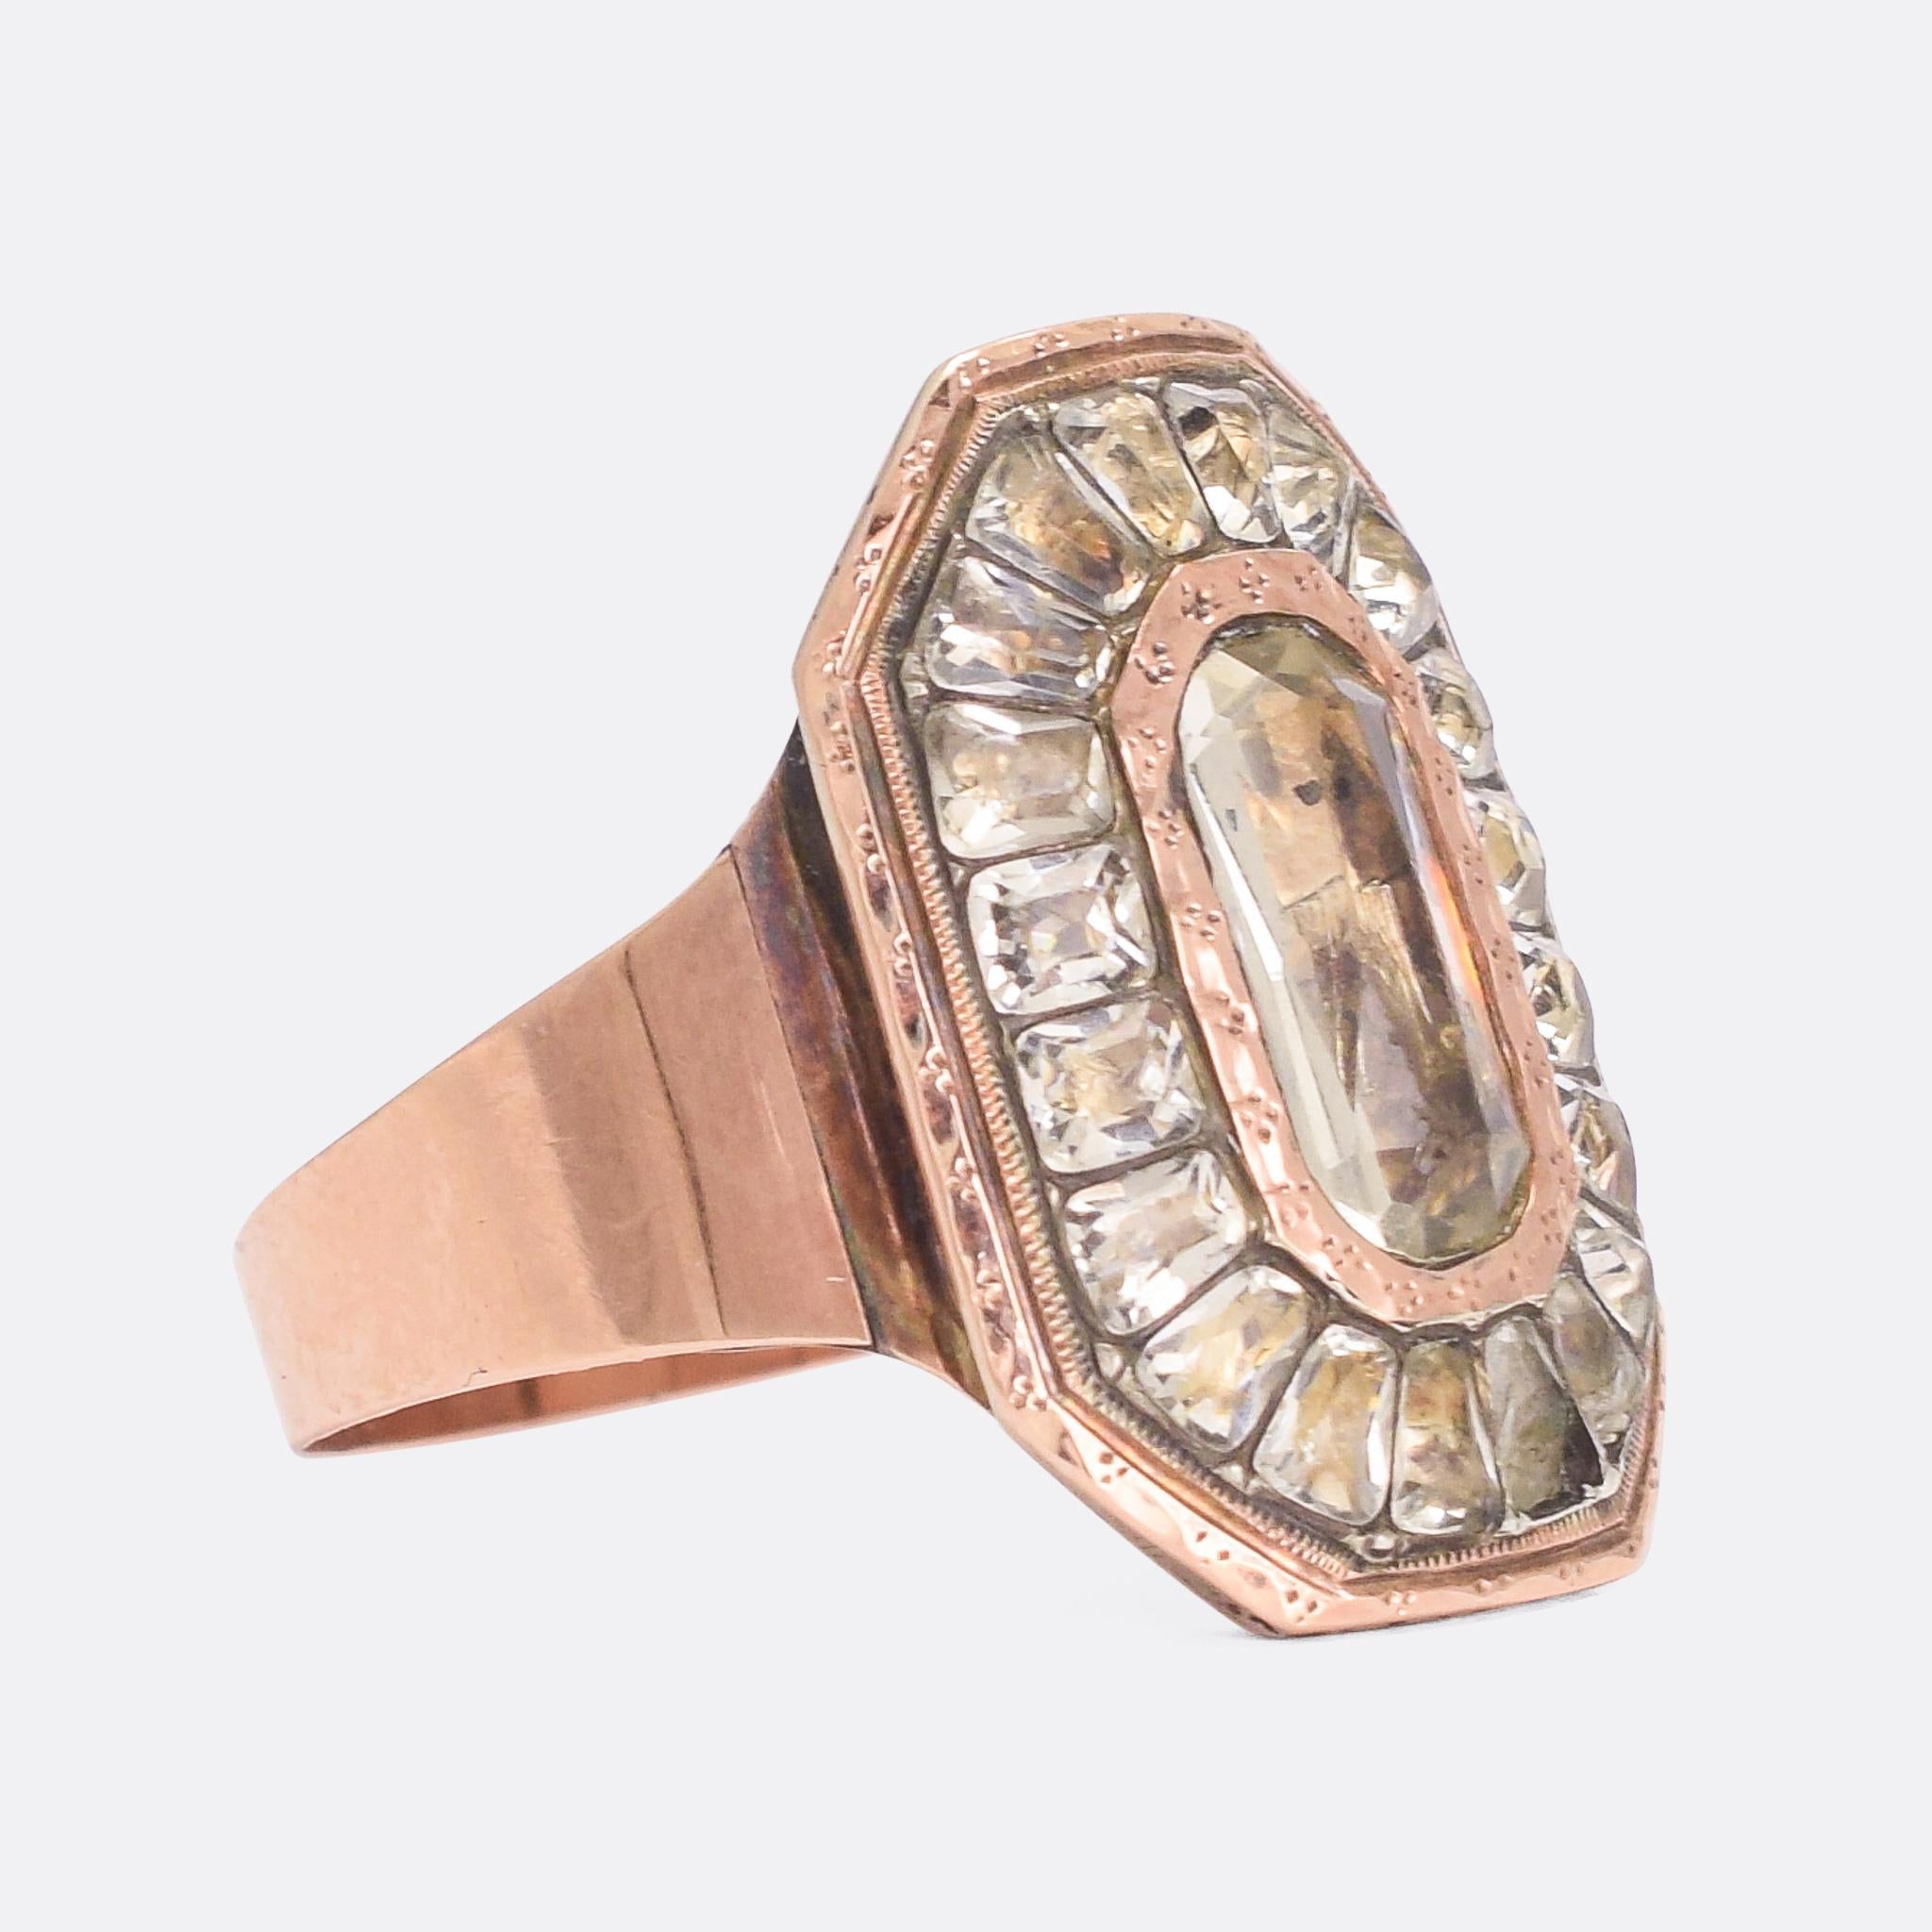 A spectacular Georgian cluster ring set with lively white paste stones arranged on a long octagonal head. The stones are foil-backed, and show a surprising range of colour in the facets. Modelled in 15 karat rose gold, it's a substantial size and